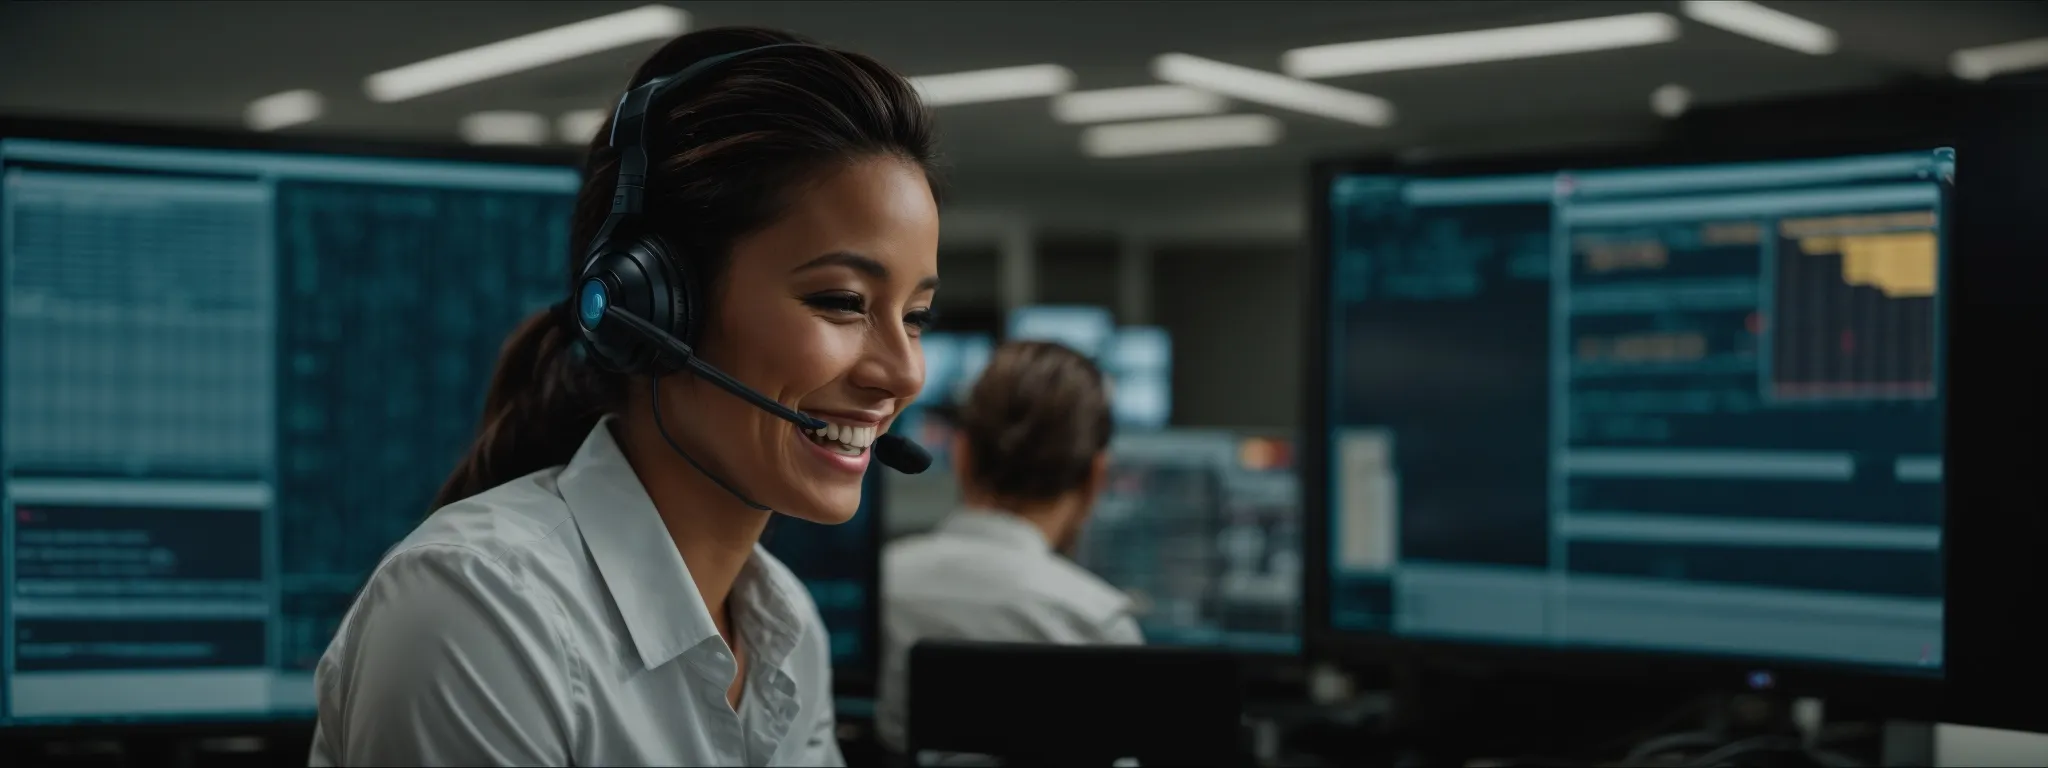 a customer service agent smiles confidently as they navigate a sophisticated software interface on a large computer monitor.